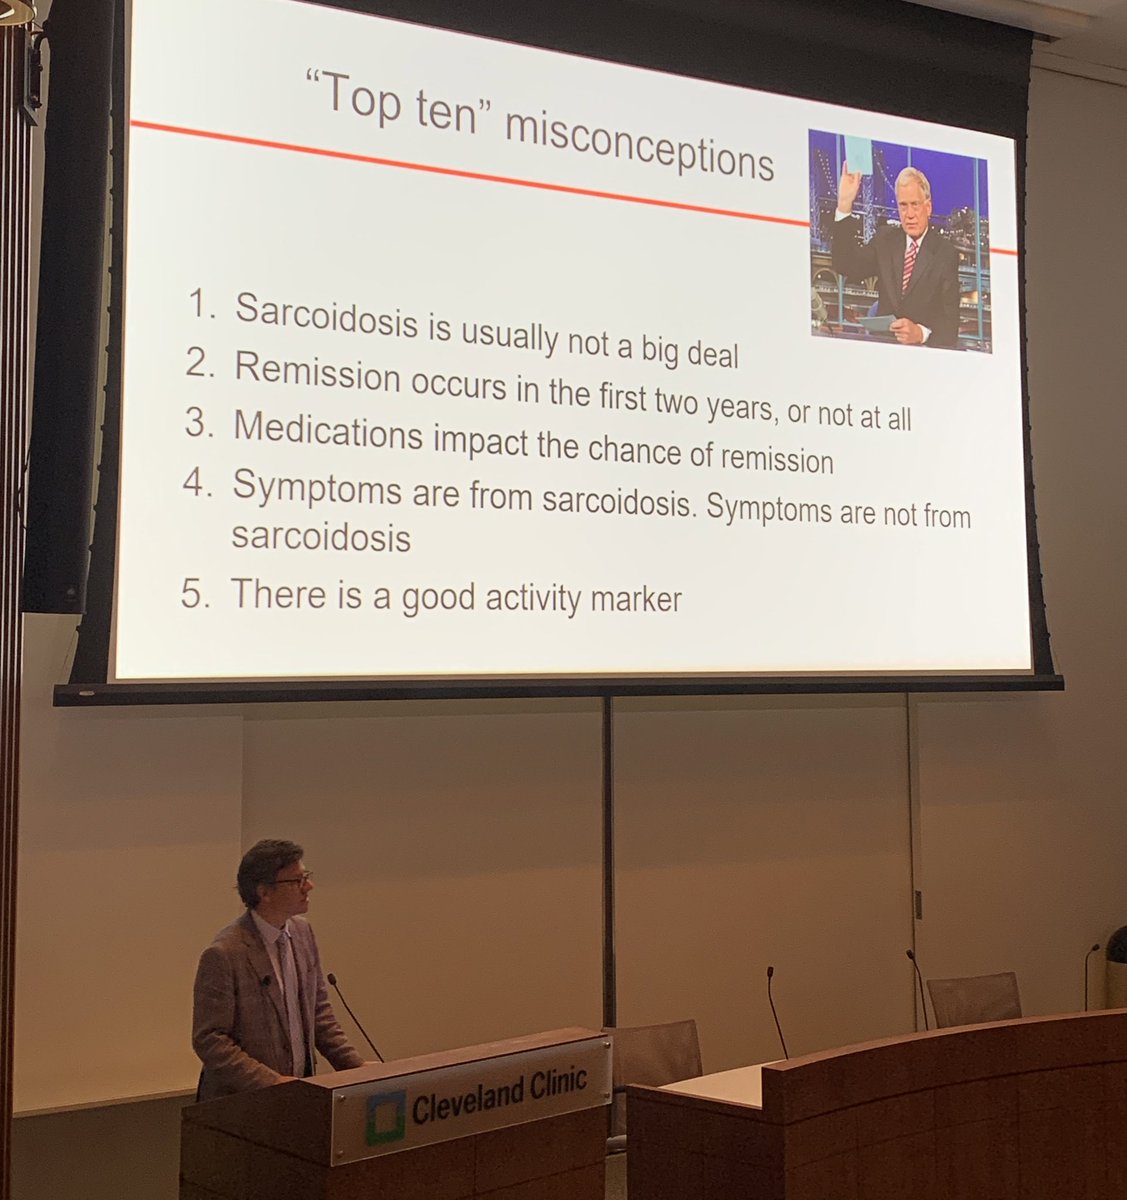 Not all symptoms of #Sarcoidosis are from granulomas! Here are #Top10 misconceptions of Sarcoidosis. @CCF_IMCHIEFS @Mud_Fud #MedicineGrandRounds